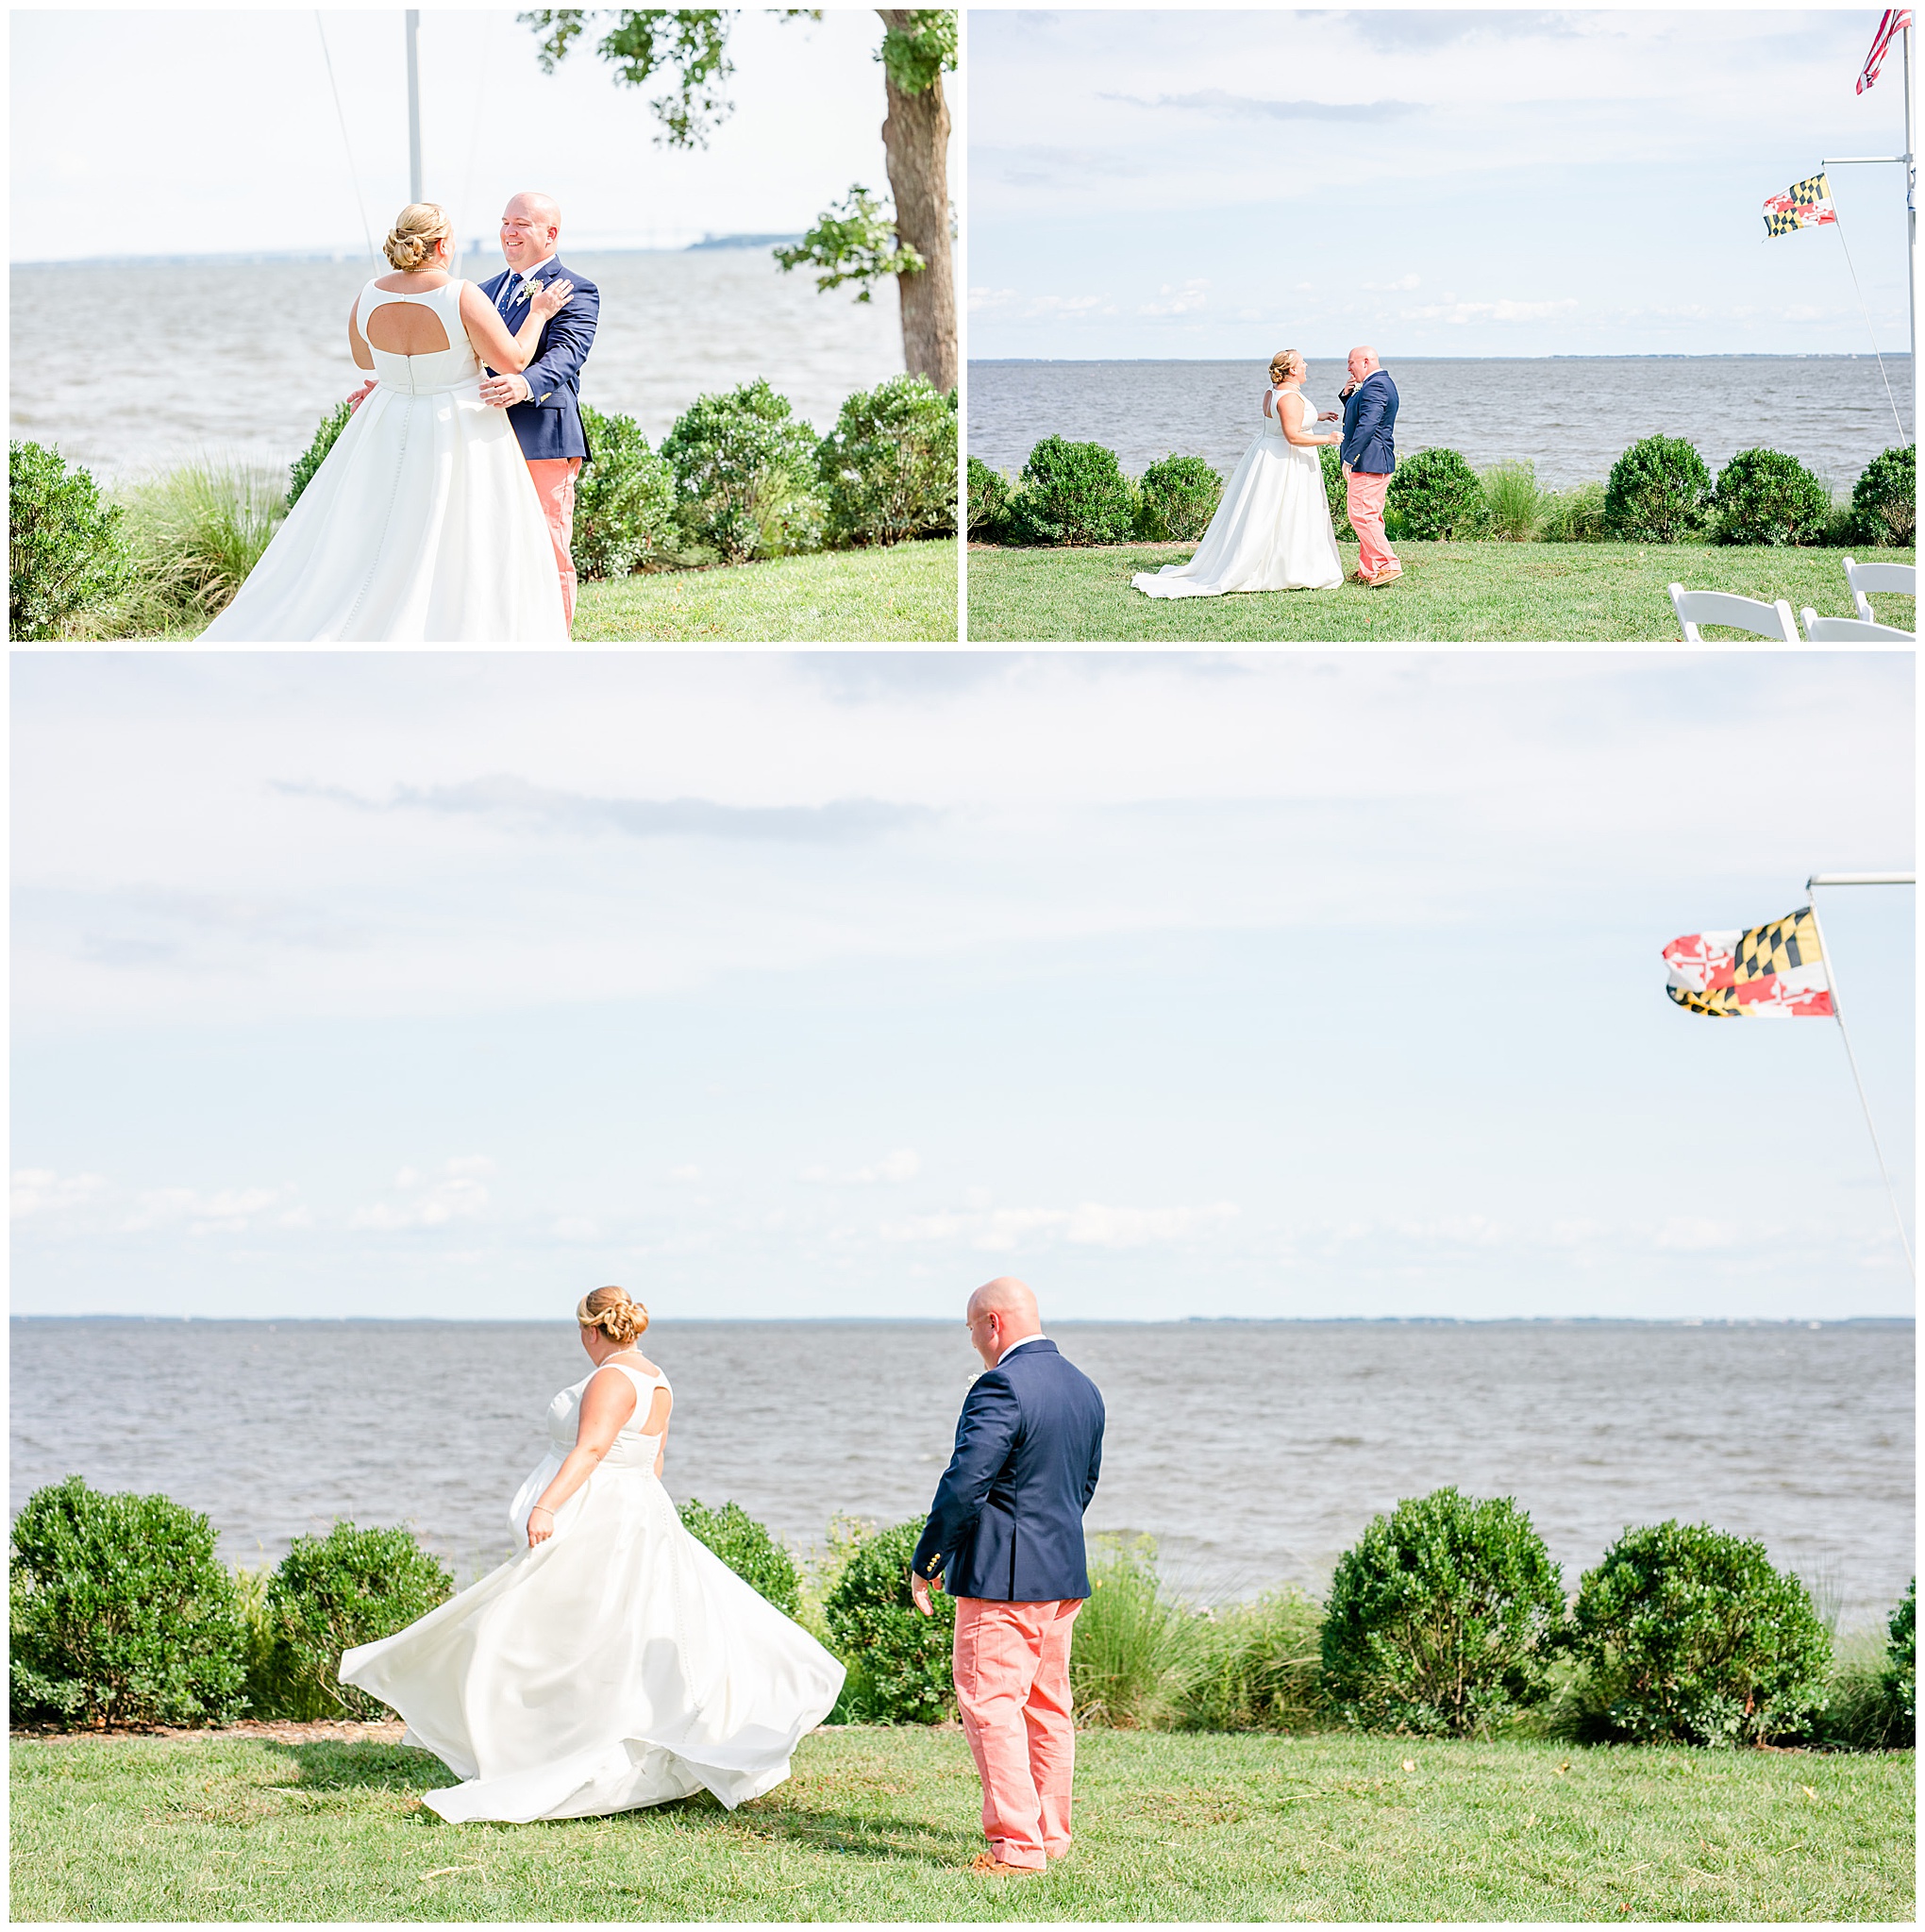 Nantucket inspired Gibson Island Club wedding, nautical wedding inspiration, Annapolitan wedding inspiration, Gibson Island Club wedding photography, Gibson Island Club wedding photographer, Annapolis wedding photographer, Baltimore wedding photographer, Maryland wedding photographer, nautical aesthetic, Annapolis wedding inspiration, Rachel E.H. Photography, bride and groom laughing, bride and groom smiling, bride and groom looking at water, bride spinning in dress